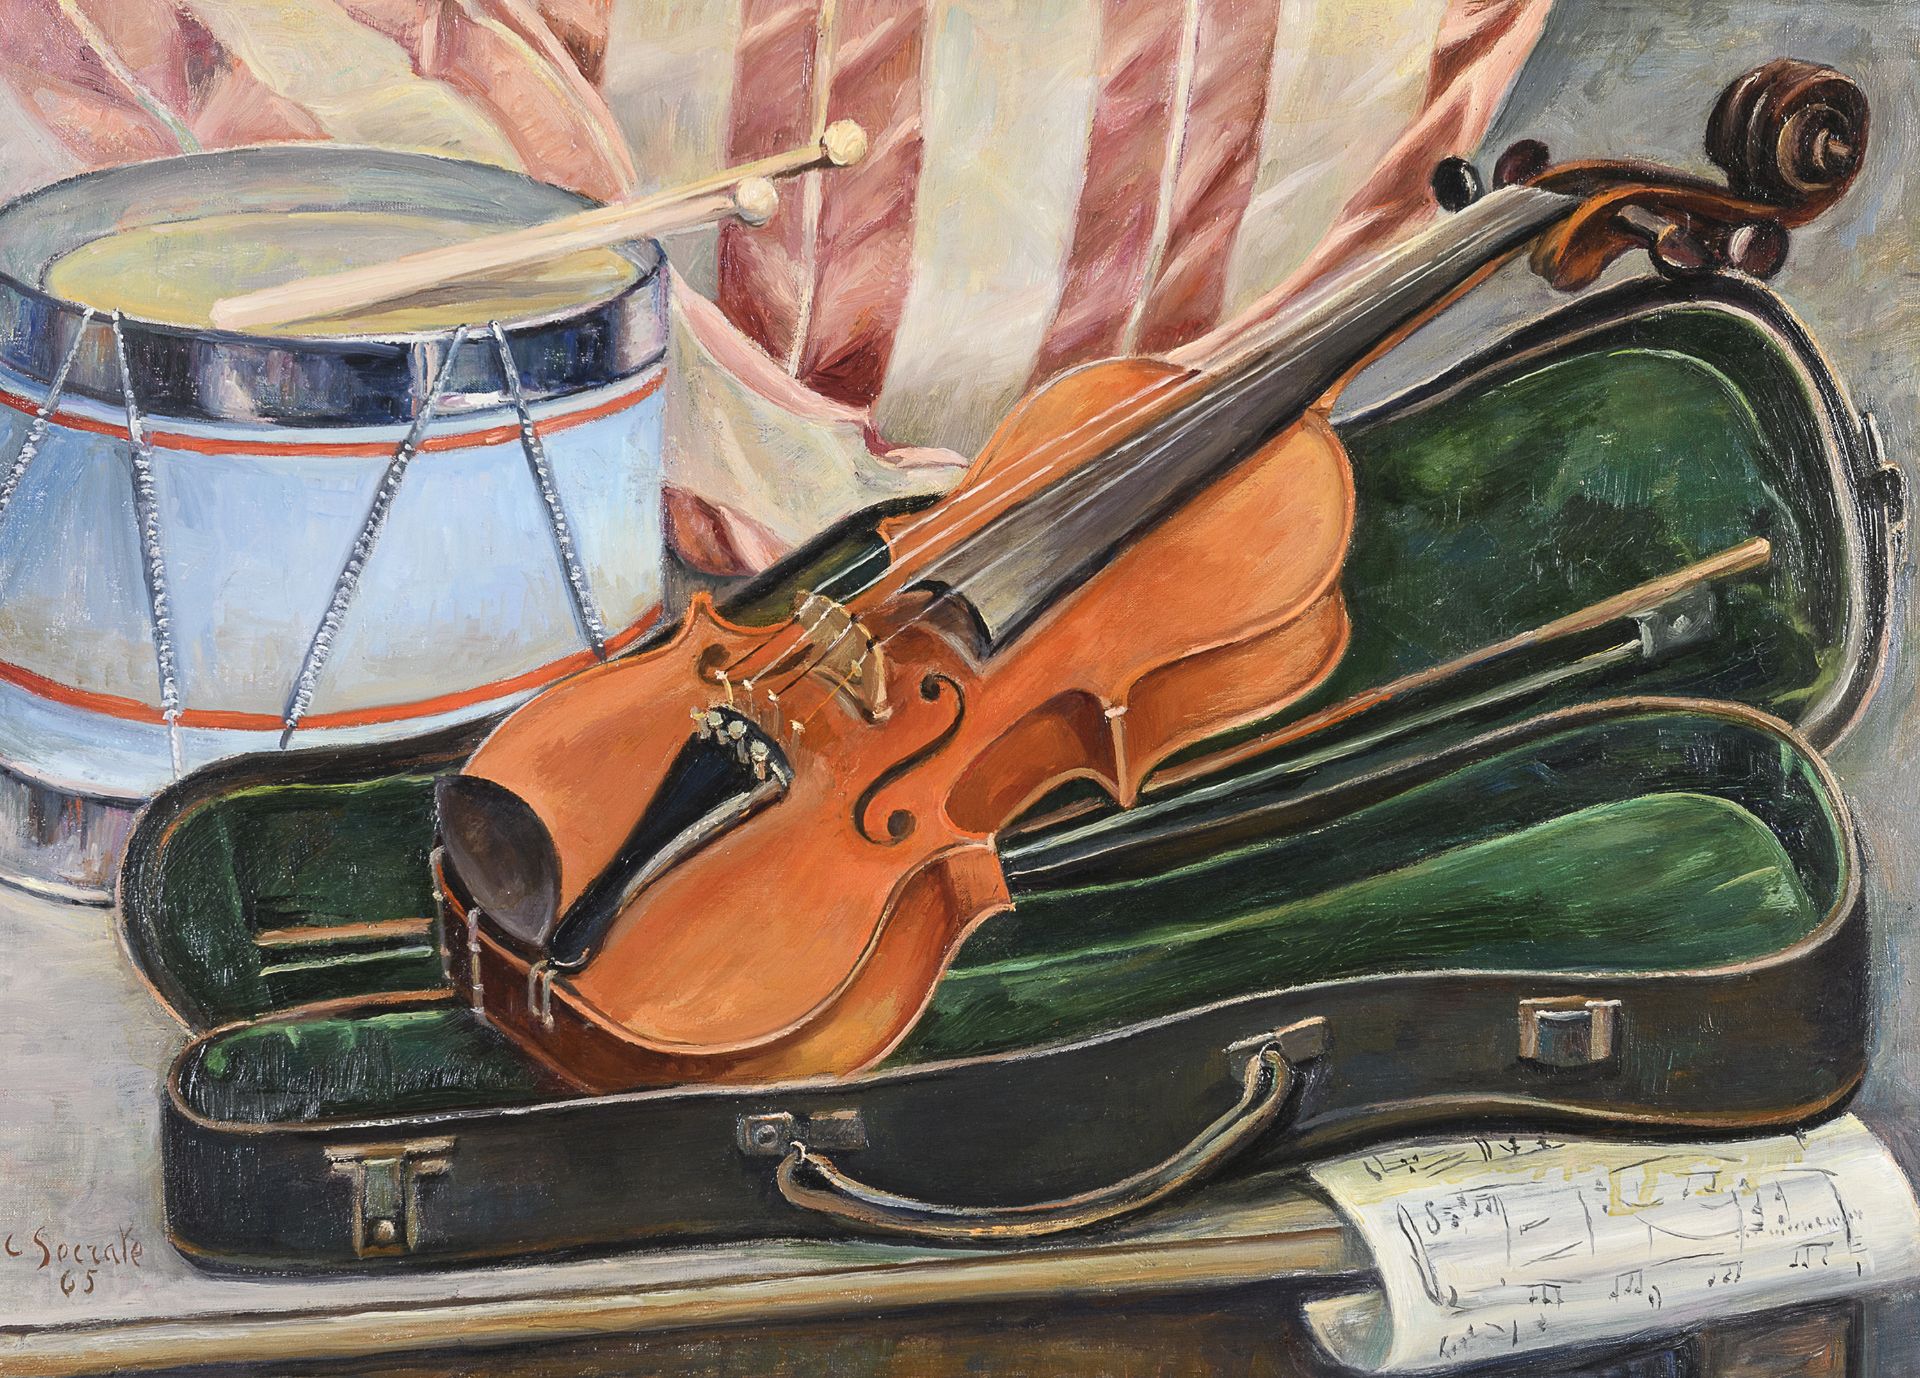 OIL STILL LIFE WITH MUSICAL INSTRUMENTS BY CARLO SOCRATES